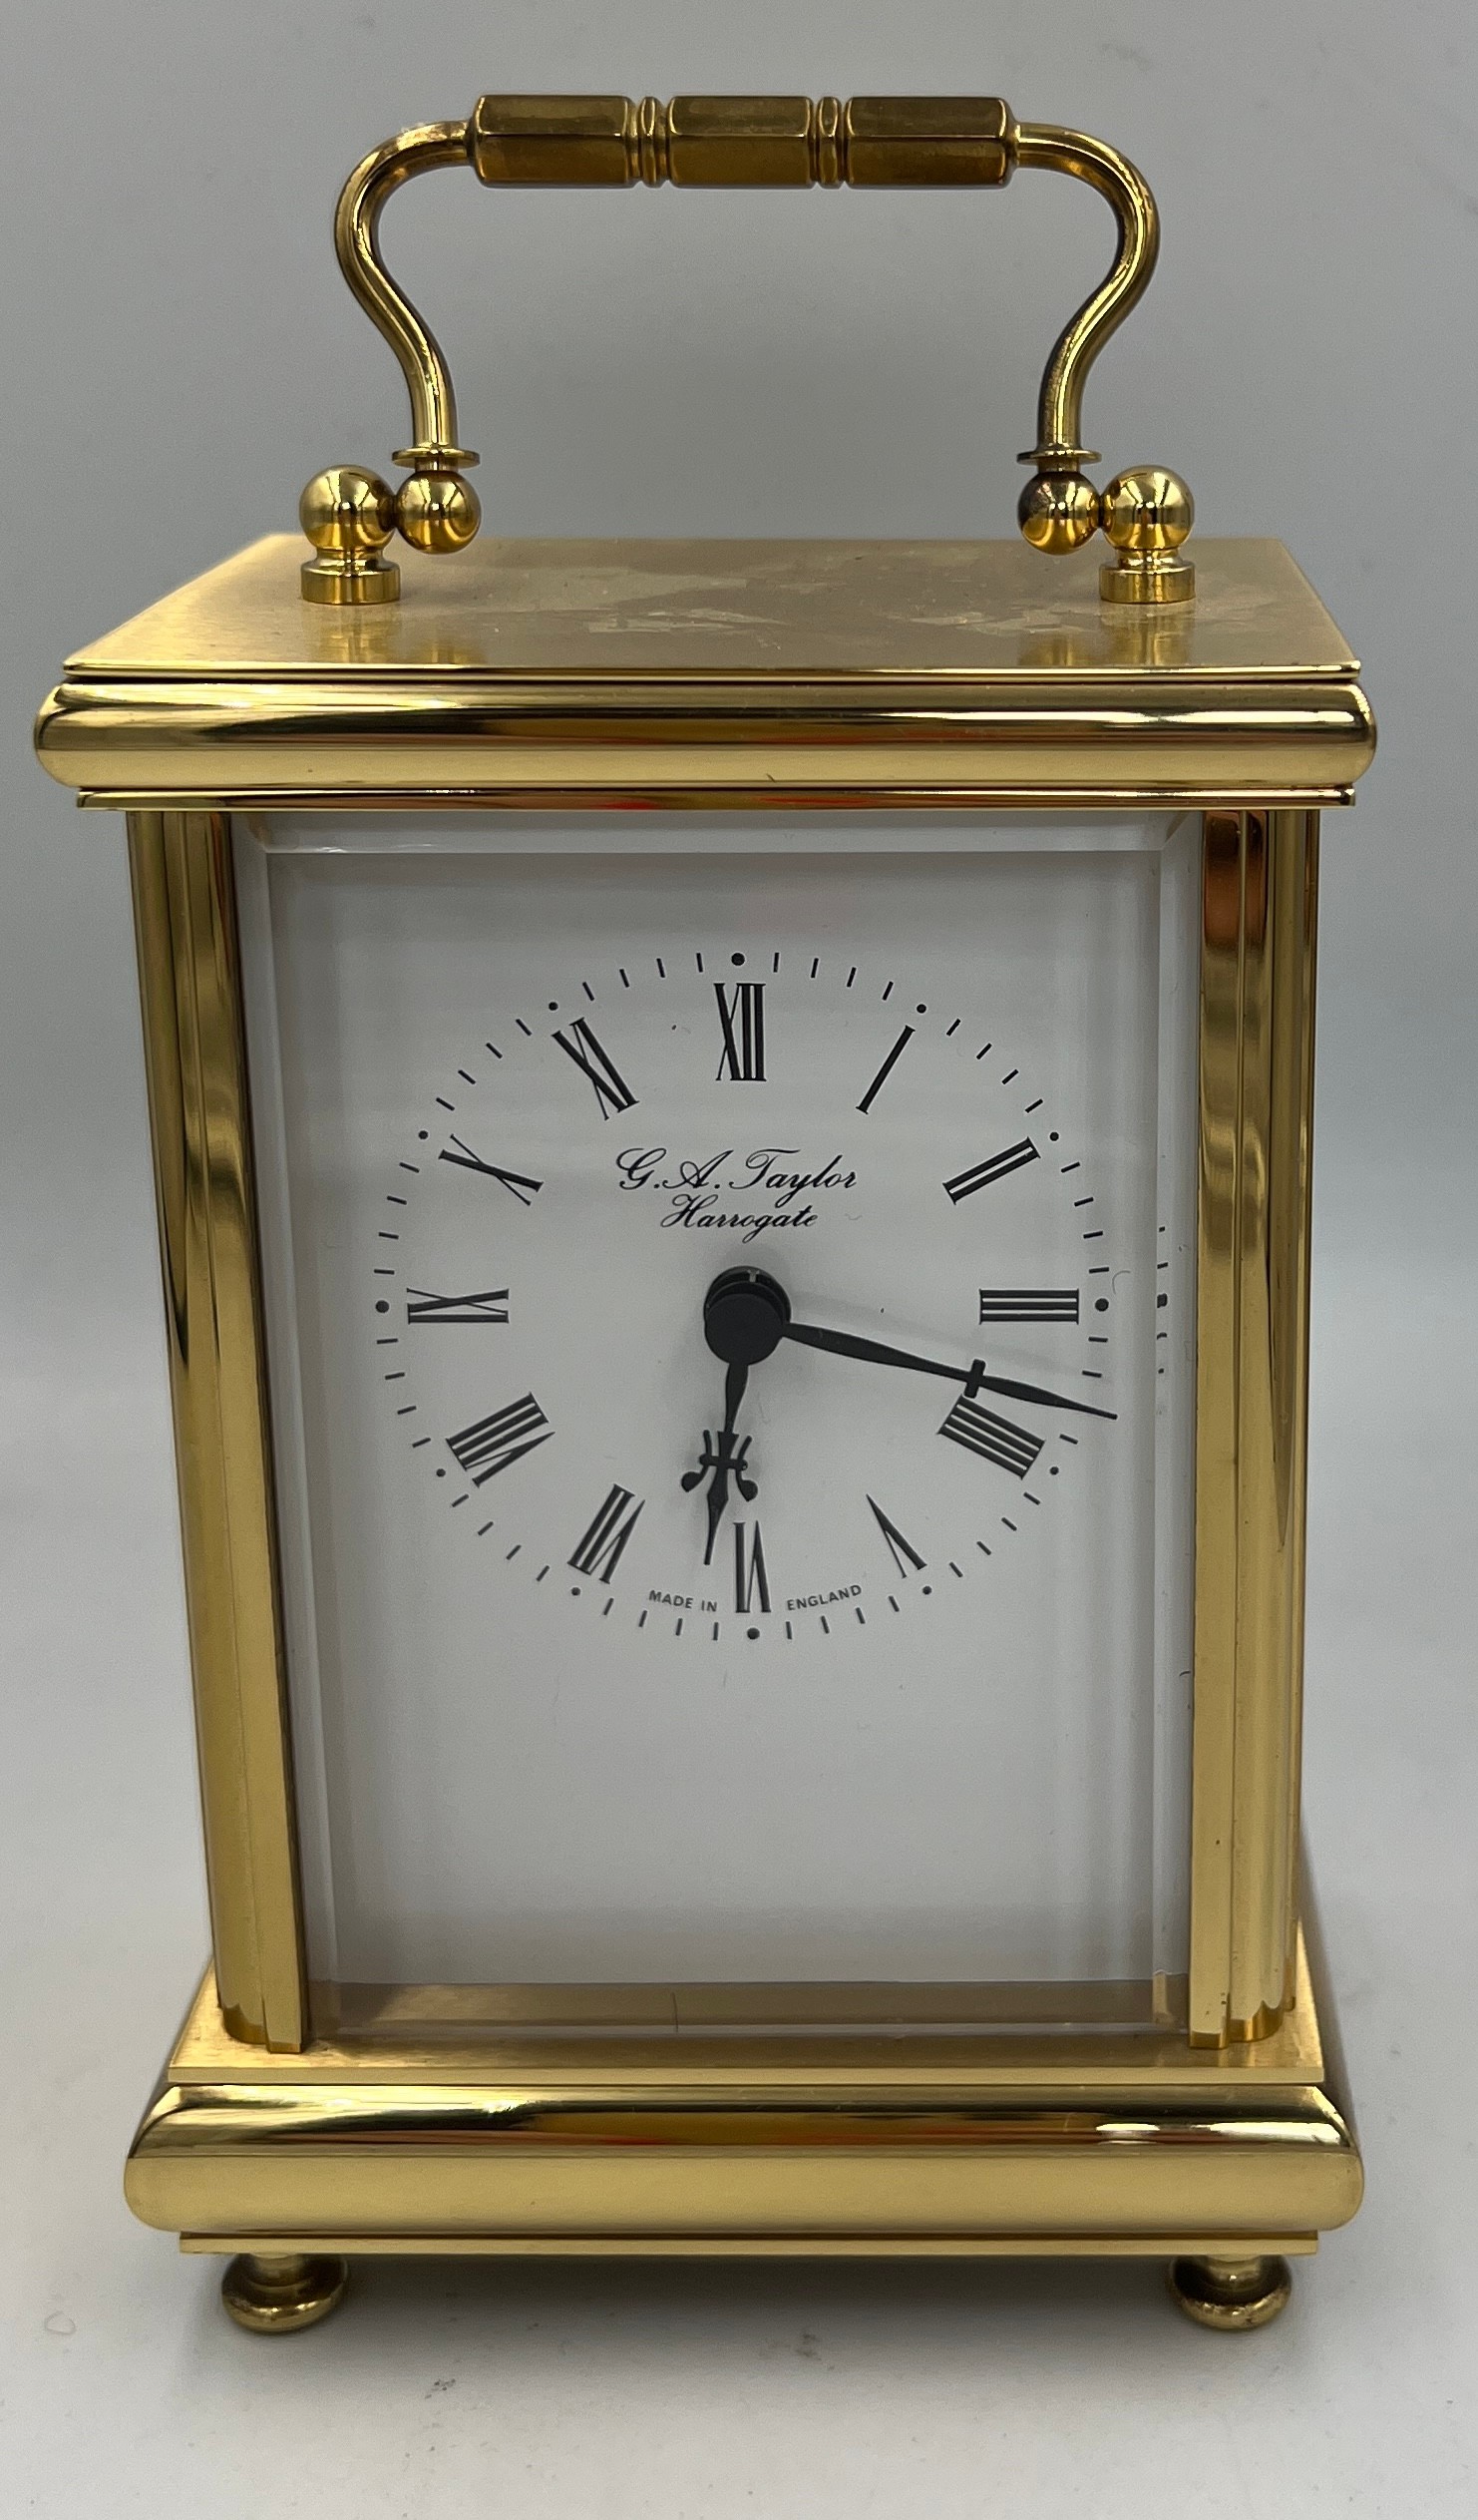 A battery driven brass cased carriage clock, marked to face G.A. Taylor Harrogate.